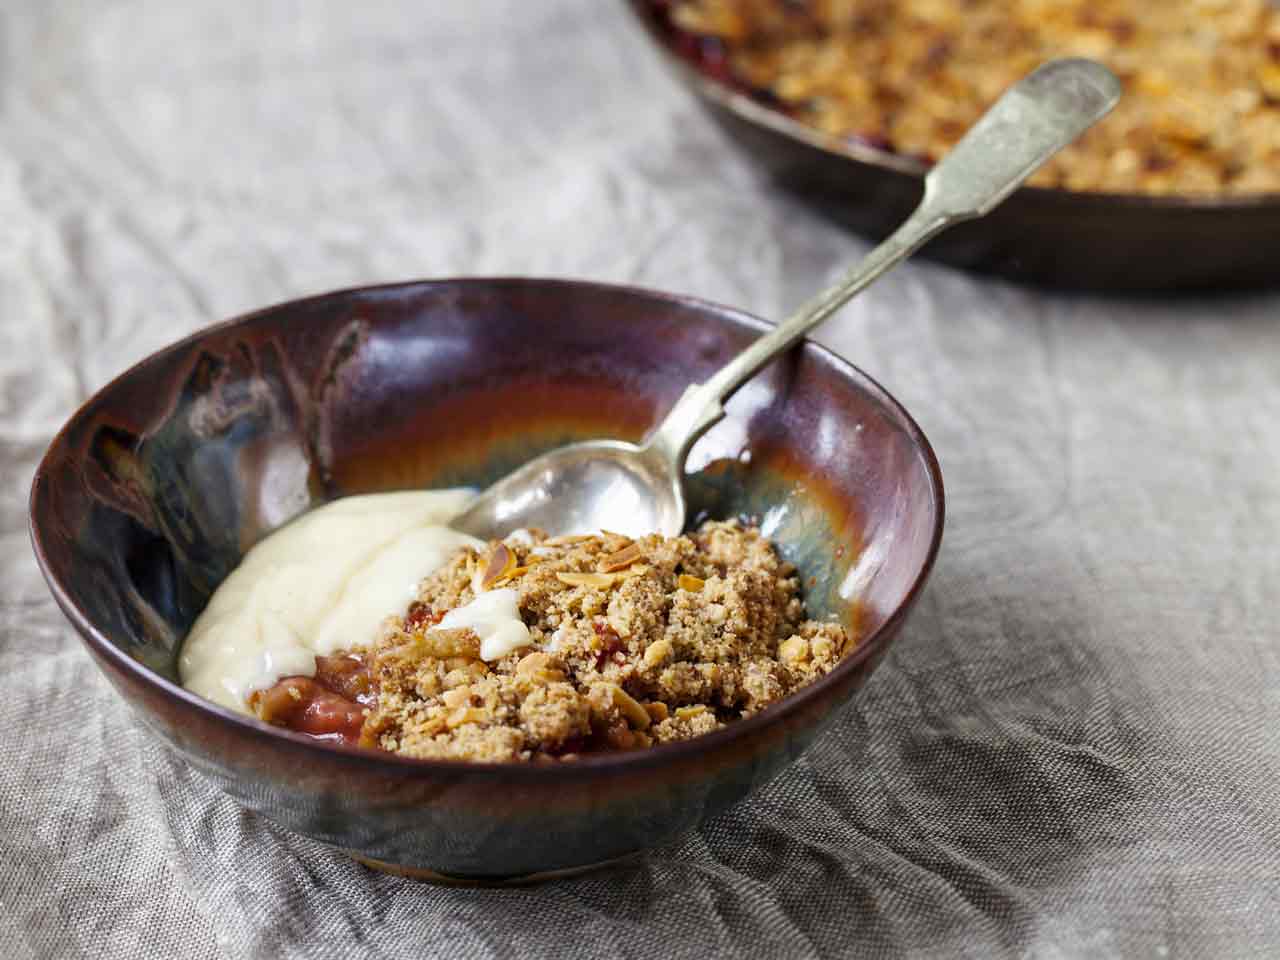 Rhubarb crumble with ginger